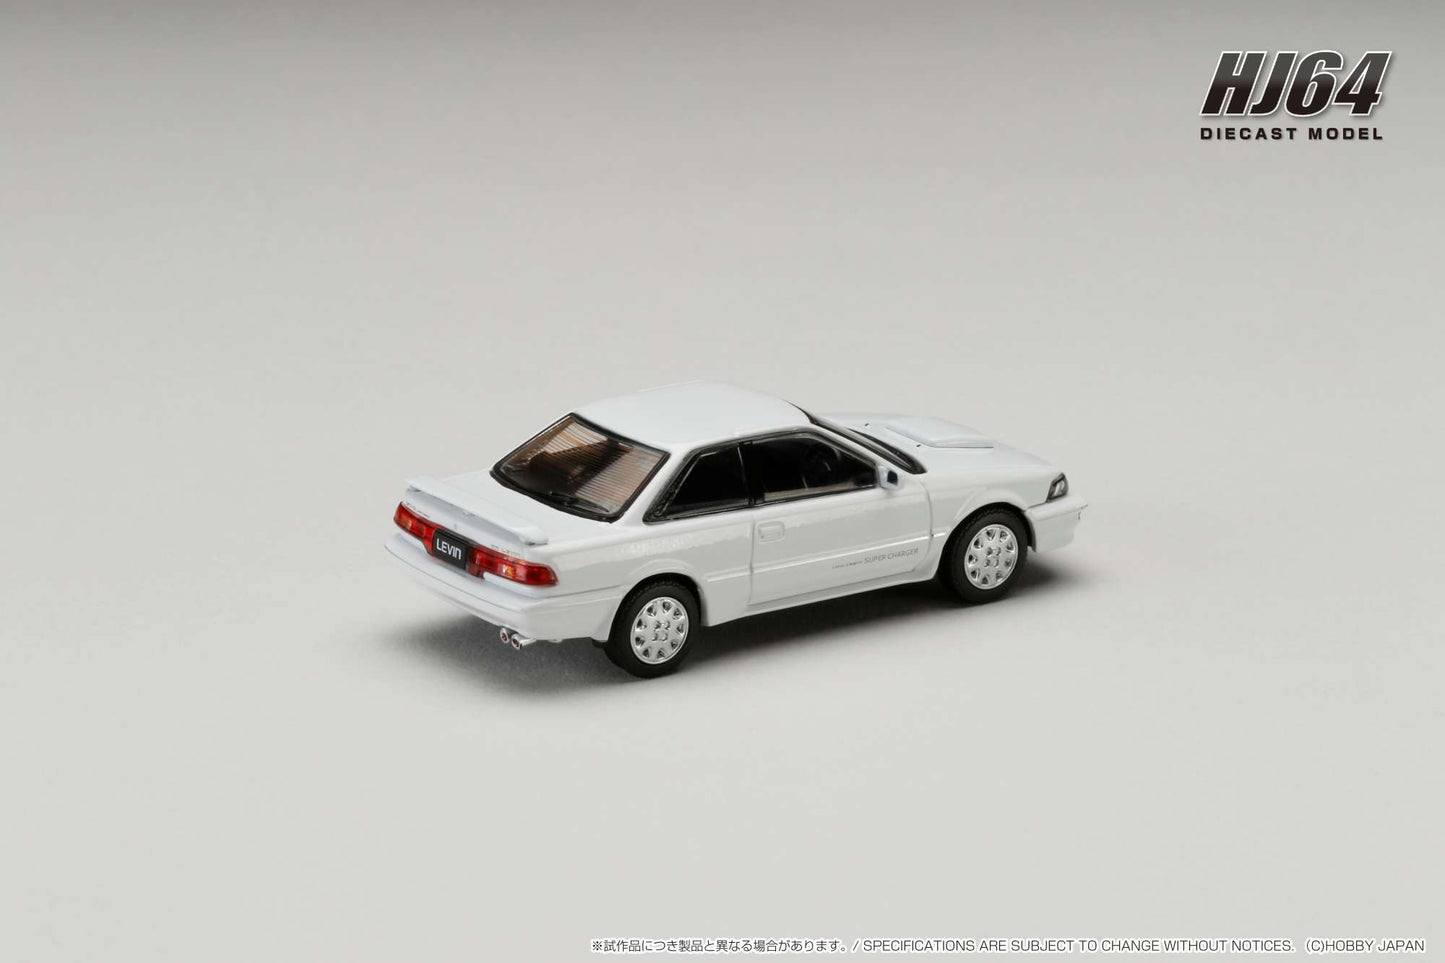 Hobby Japan 1:64 scale Toyota COROLLA LEVIN GT-Z AE92 White